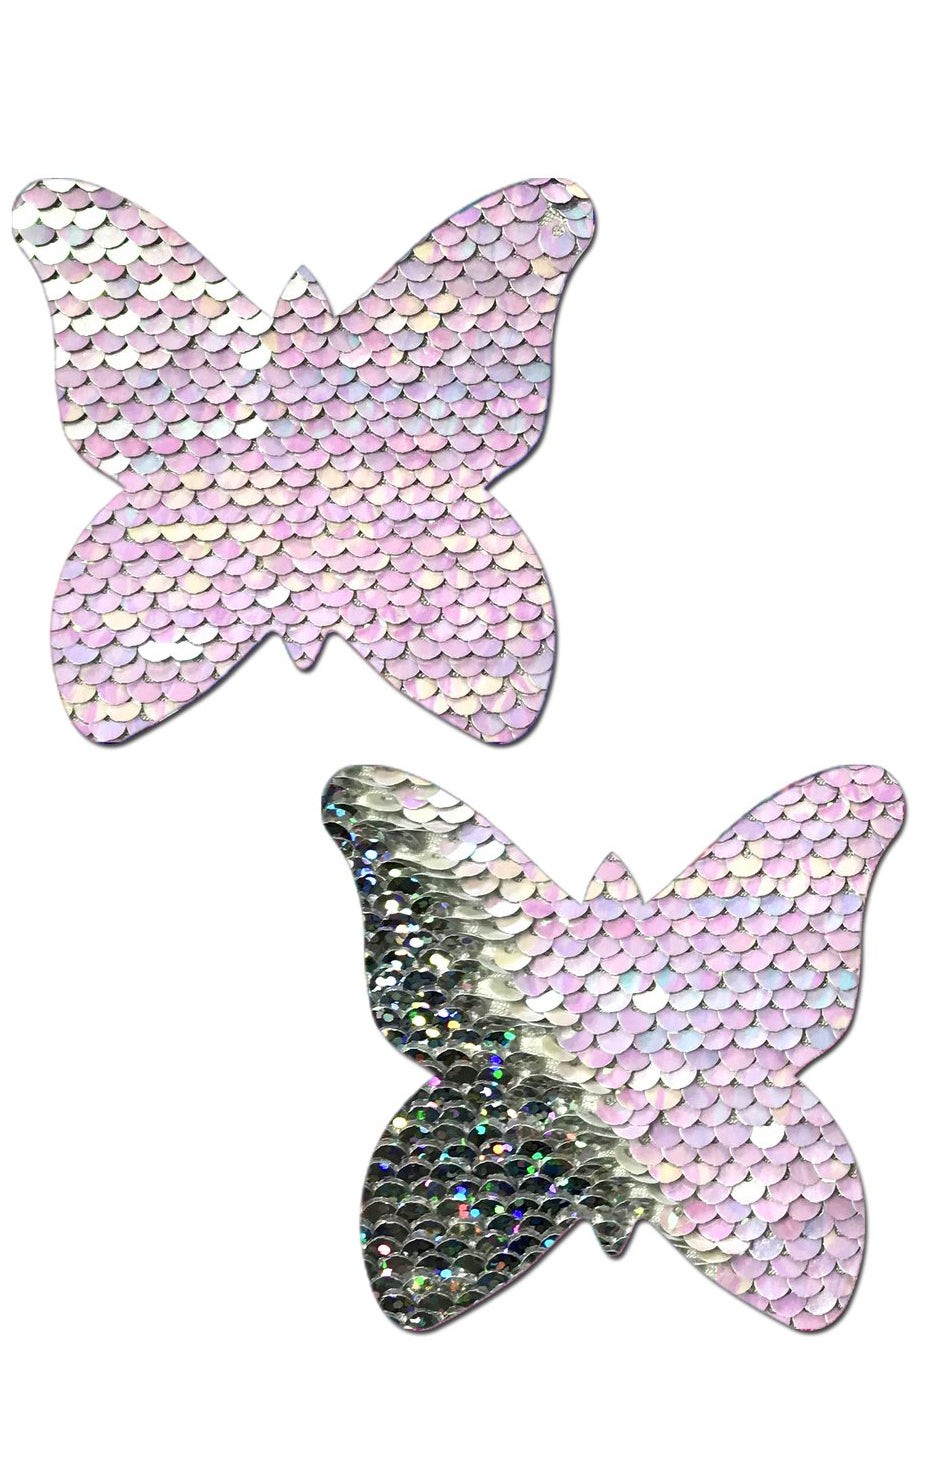 Pastease: J. Valentine Pearl to Silver Flip Sequin Pasties - Chynna Dolls Swimwear